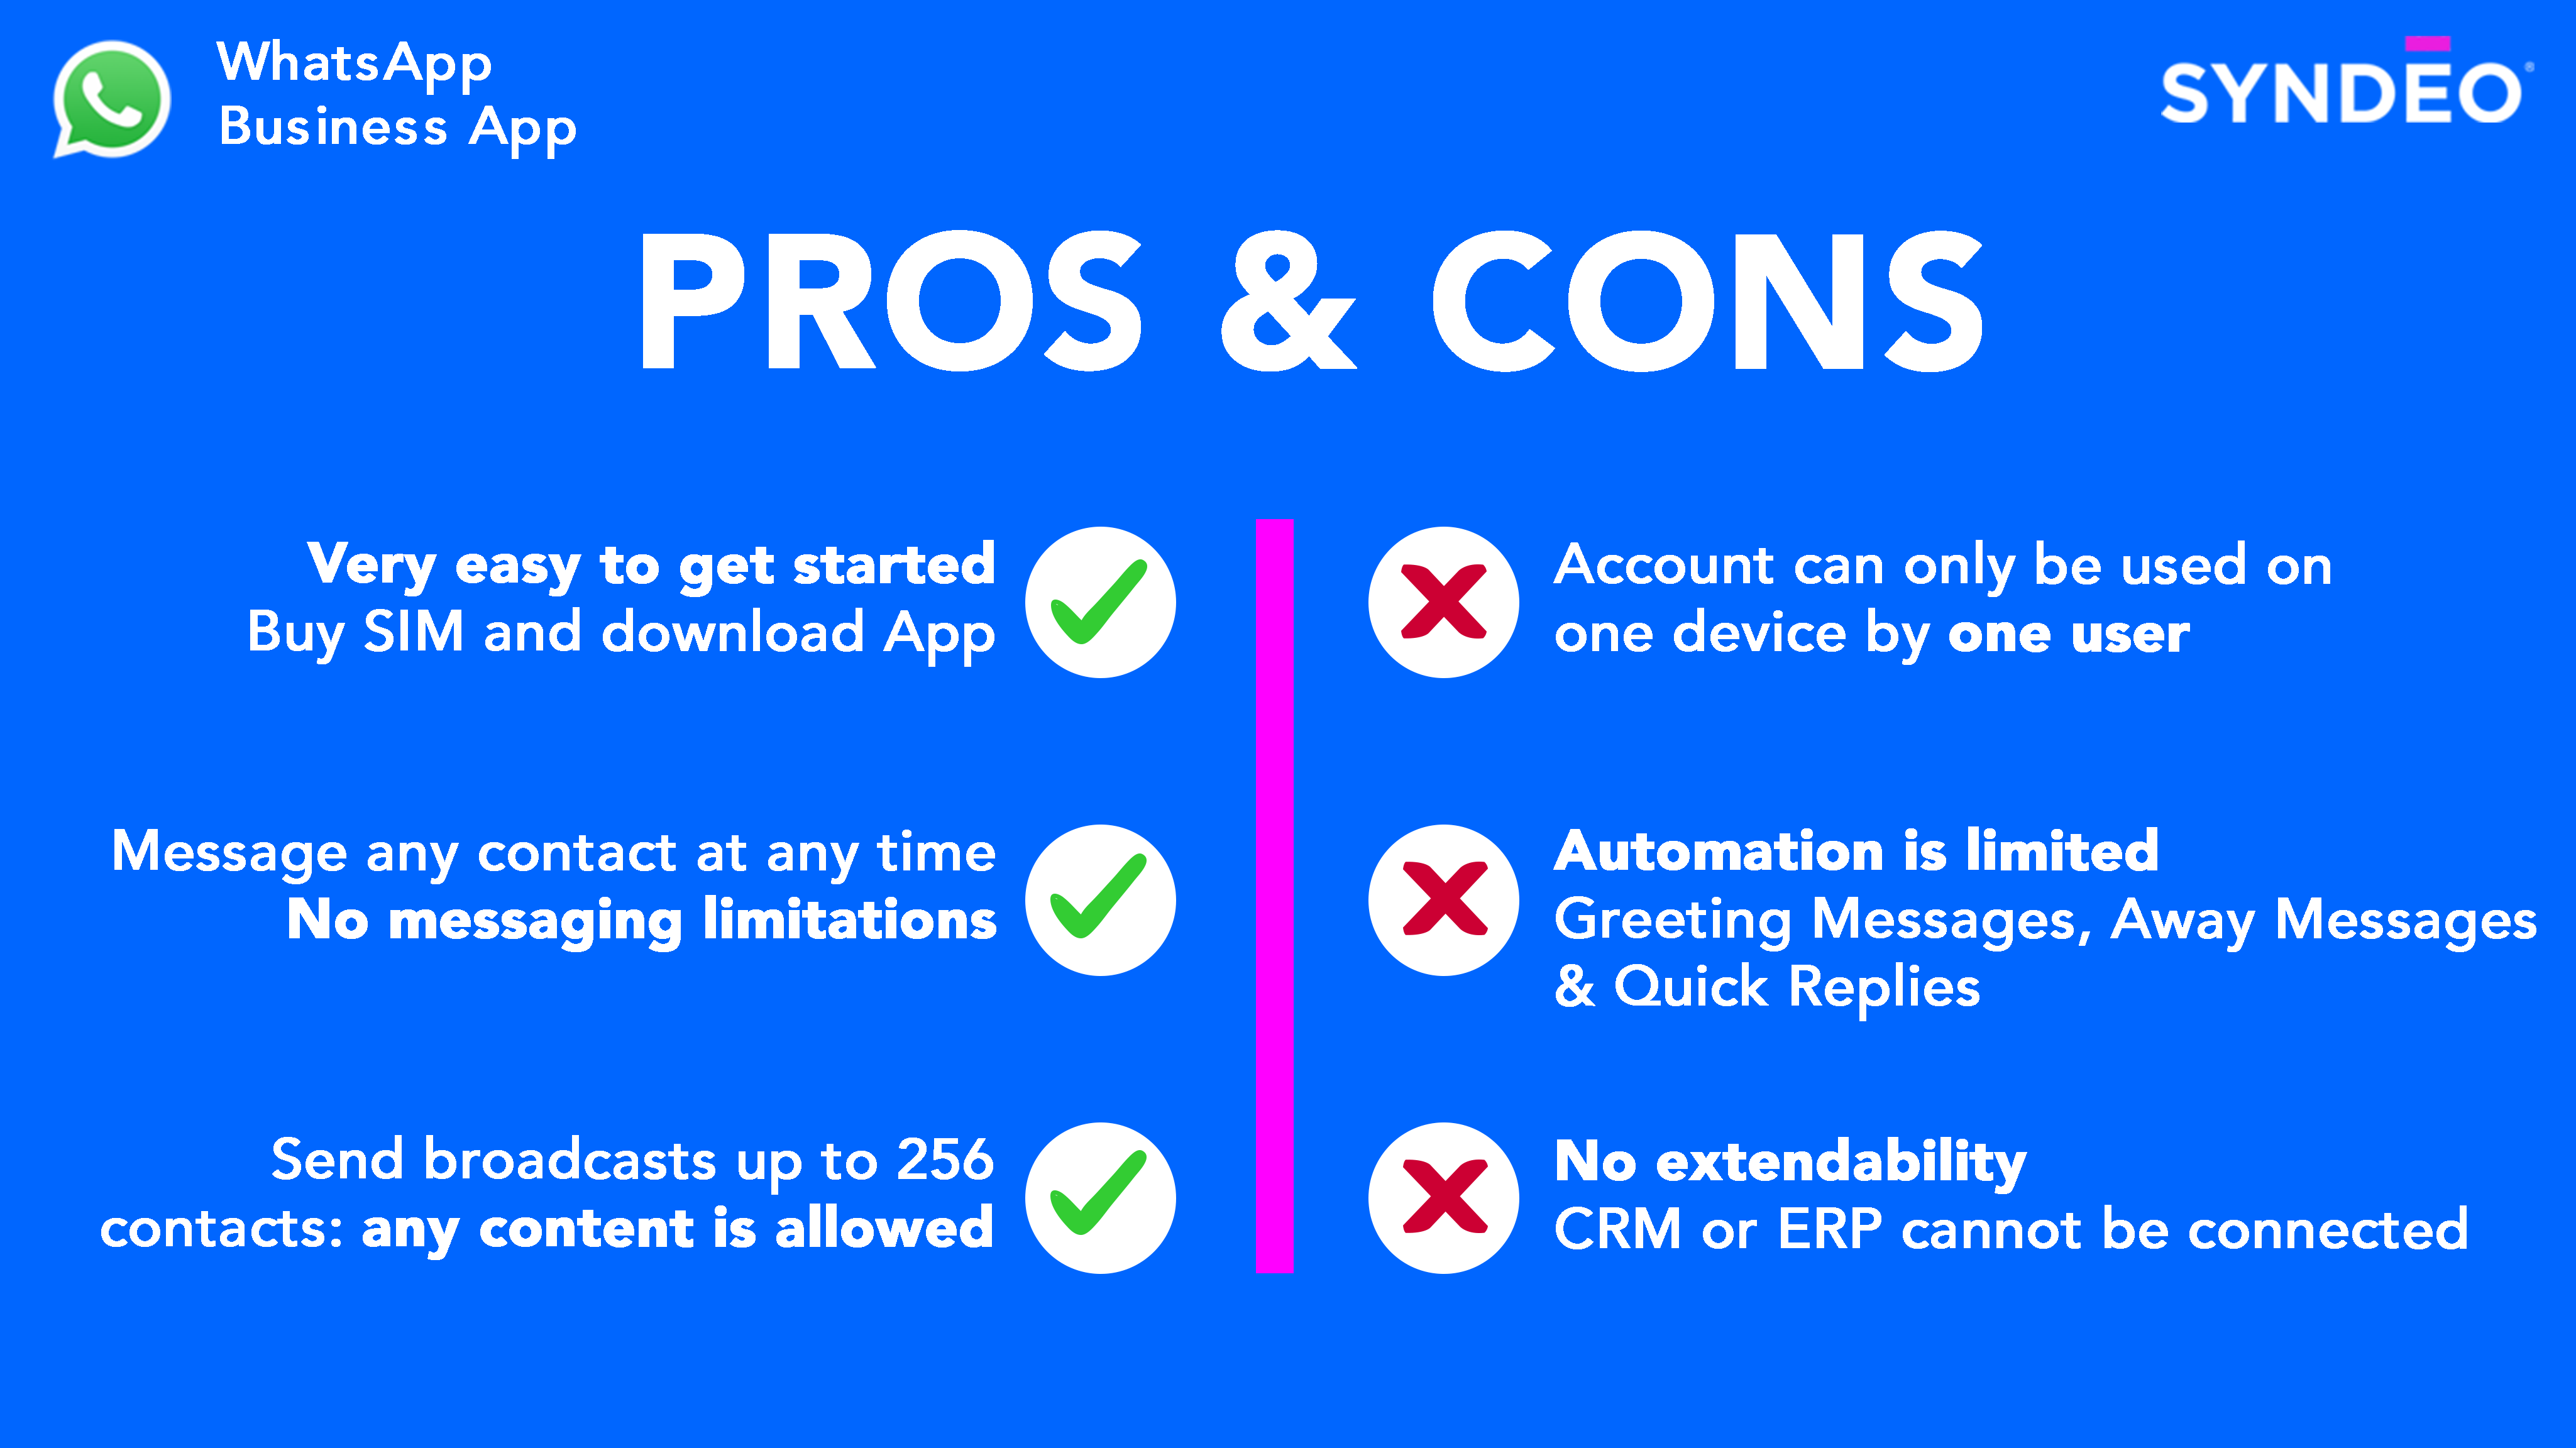 WhatsApp Pros and Cons #1 (1)